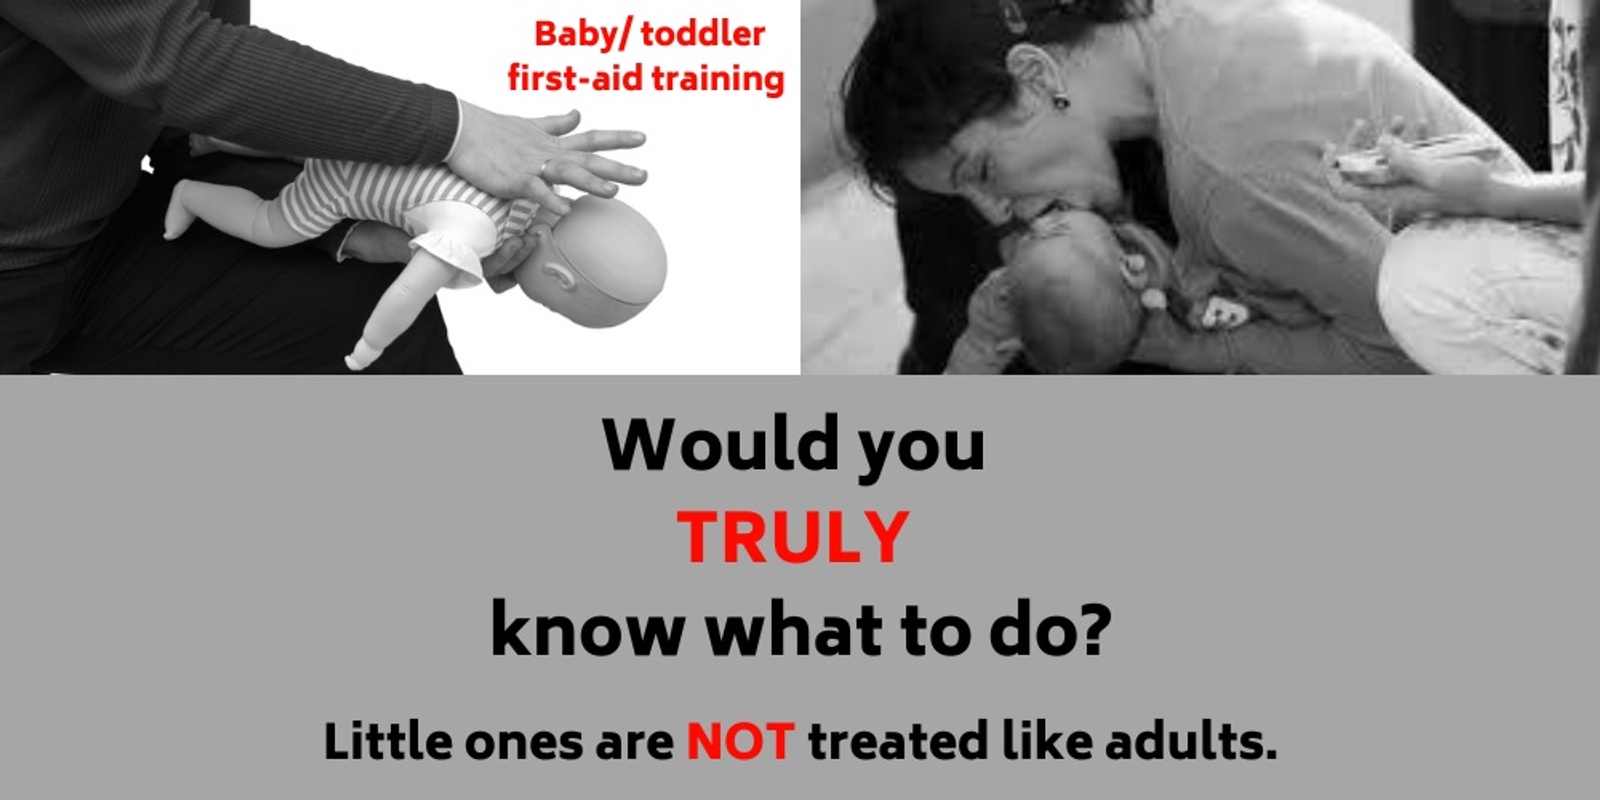 Banner image for Bunbury baby/ toddler first-aid course - 29 May